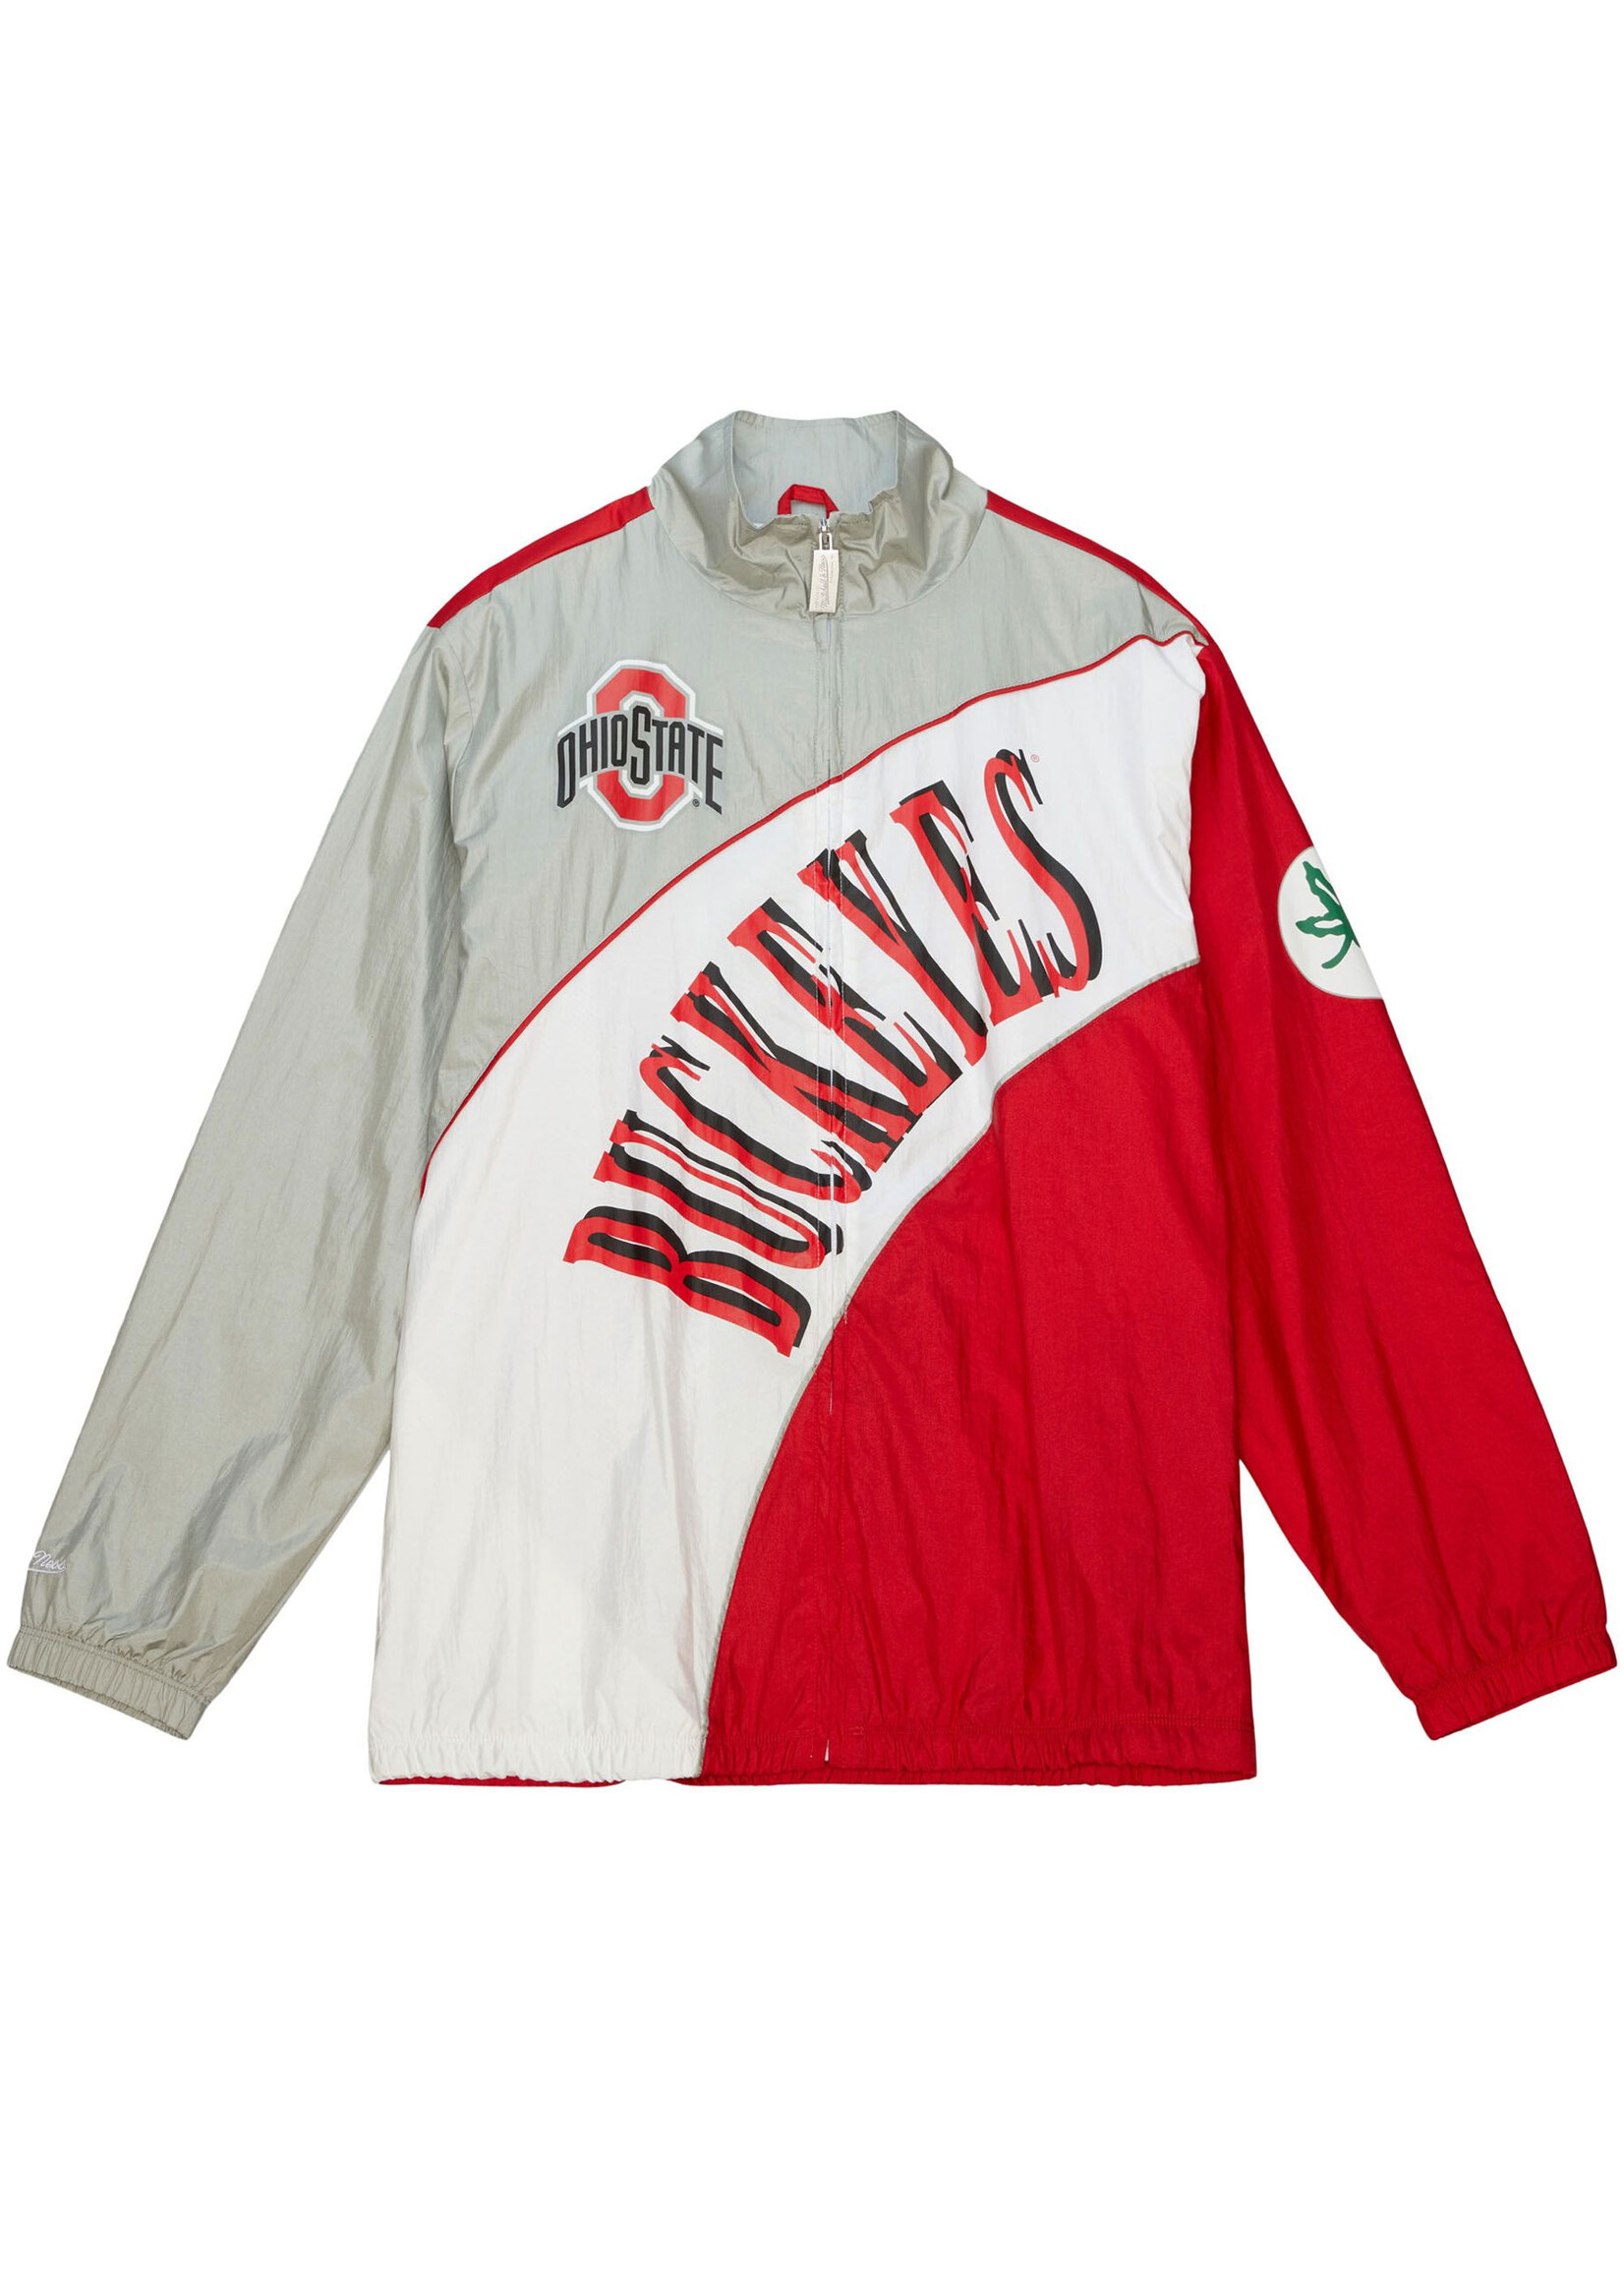 MITCHELL & NESS Ohio State Buckeyes Arched Retro Lined Windbreaker